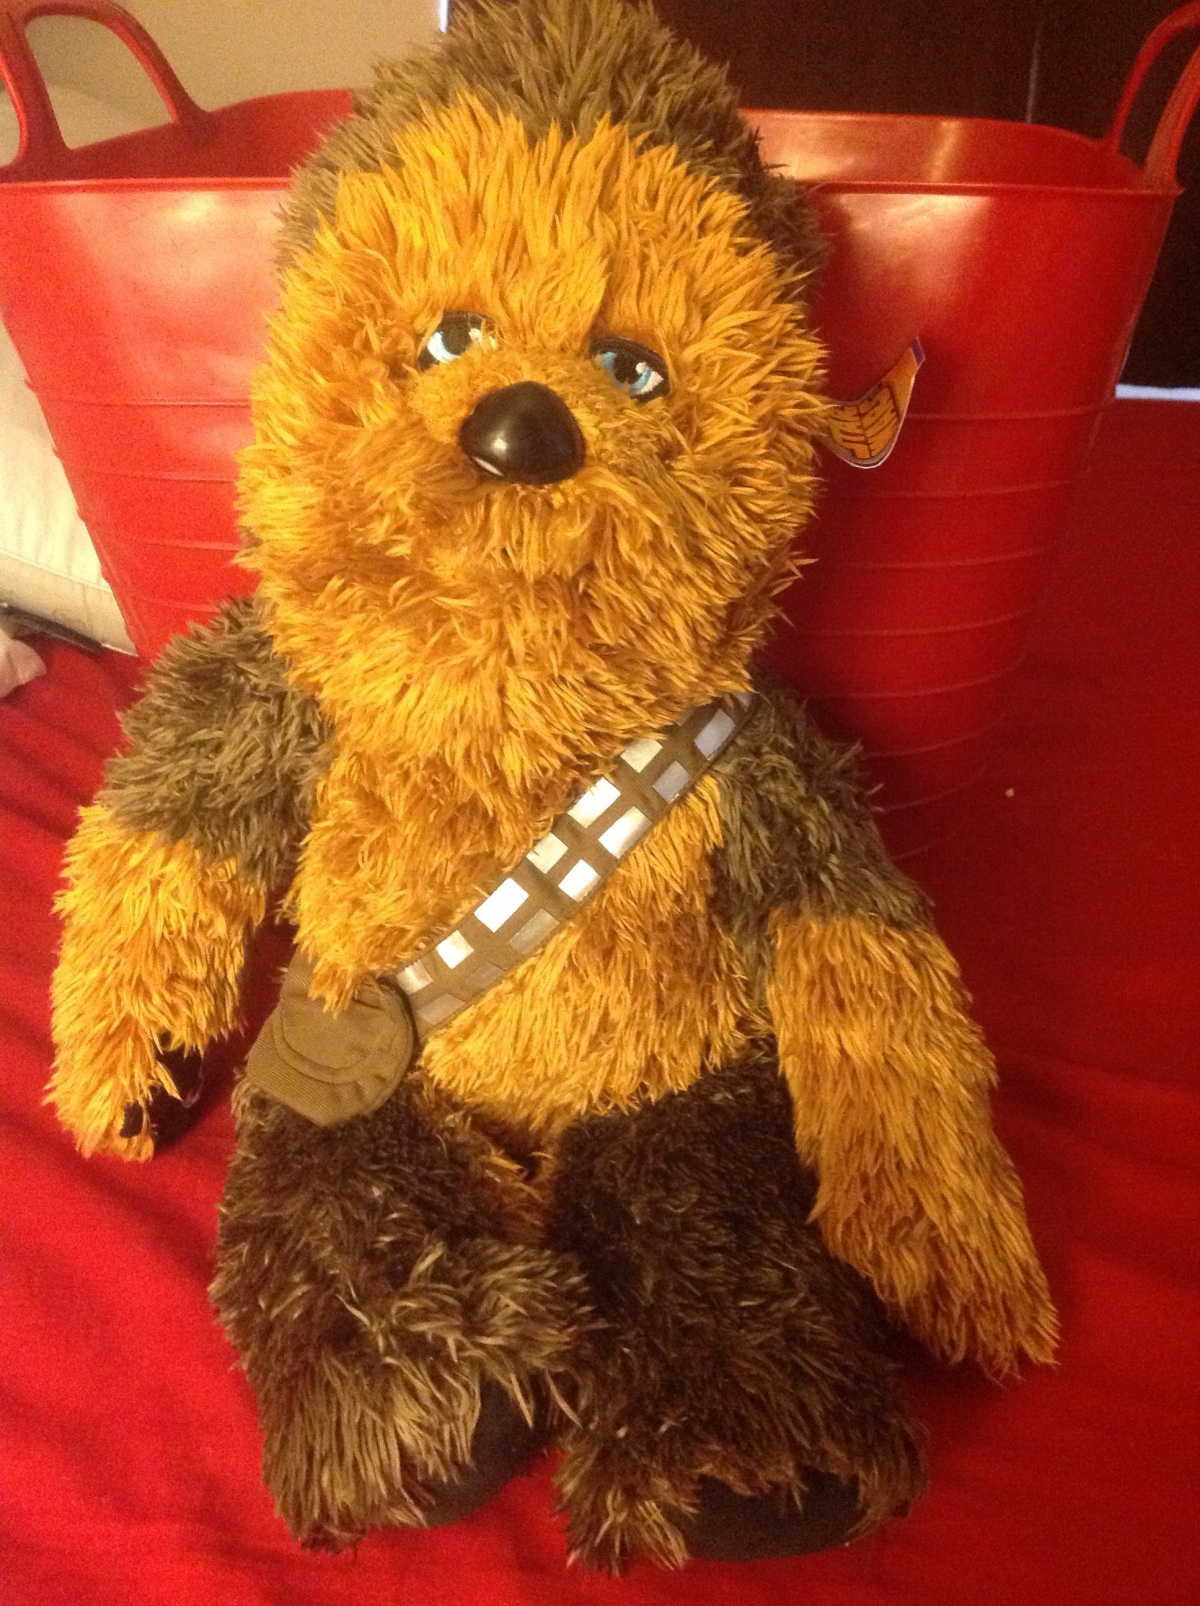 Build-A-Bear Star Wars Chewbacca Review